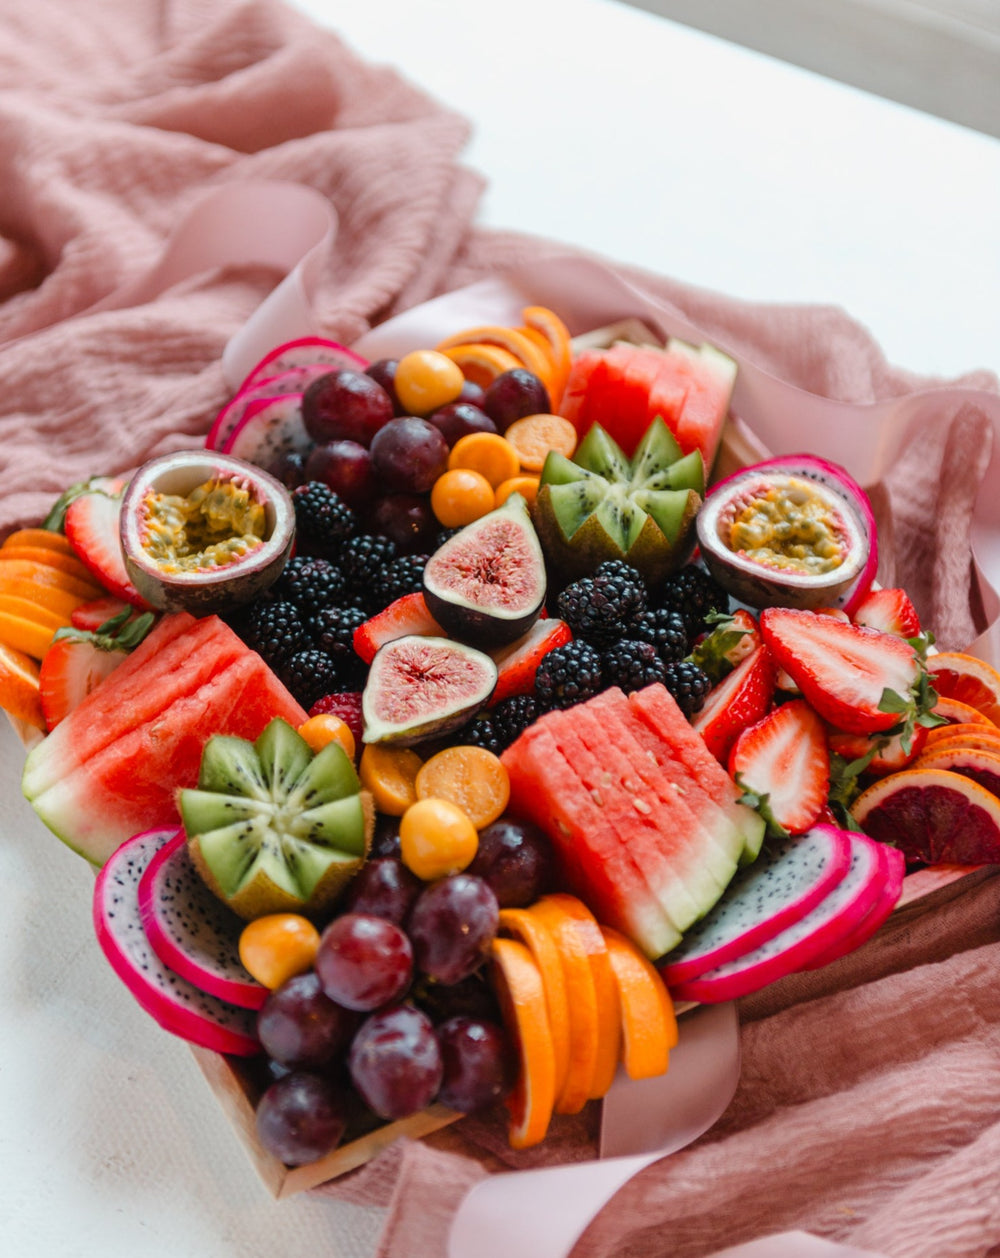 Fruit Platter is the perfect appetizer and dessert for any event! Our Fruit Platters are made with the freshest fruits, professionally styled, and ready to serve!